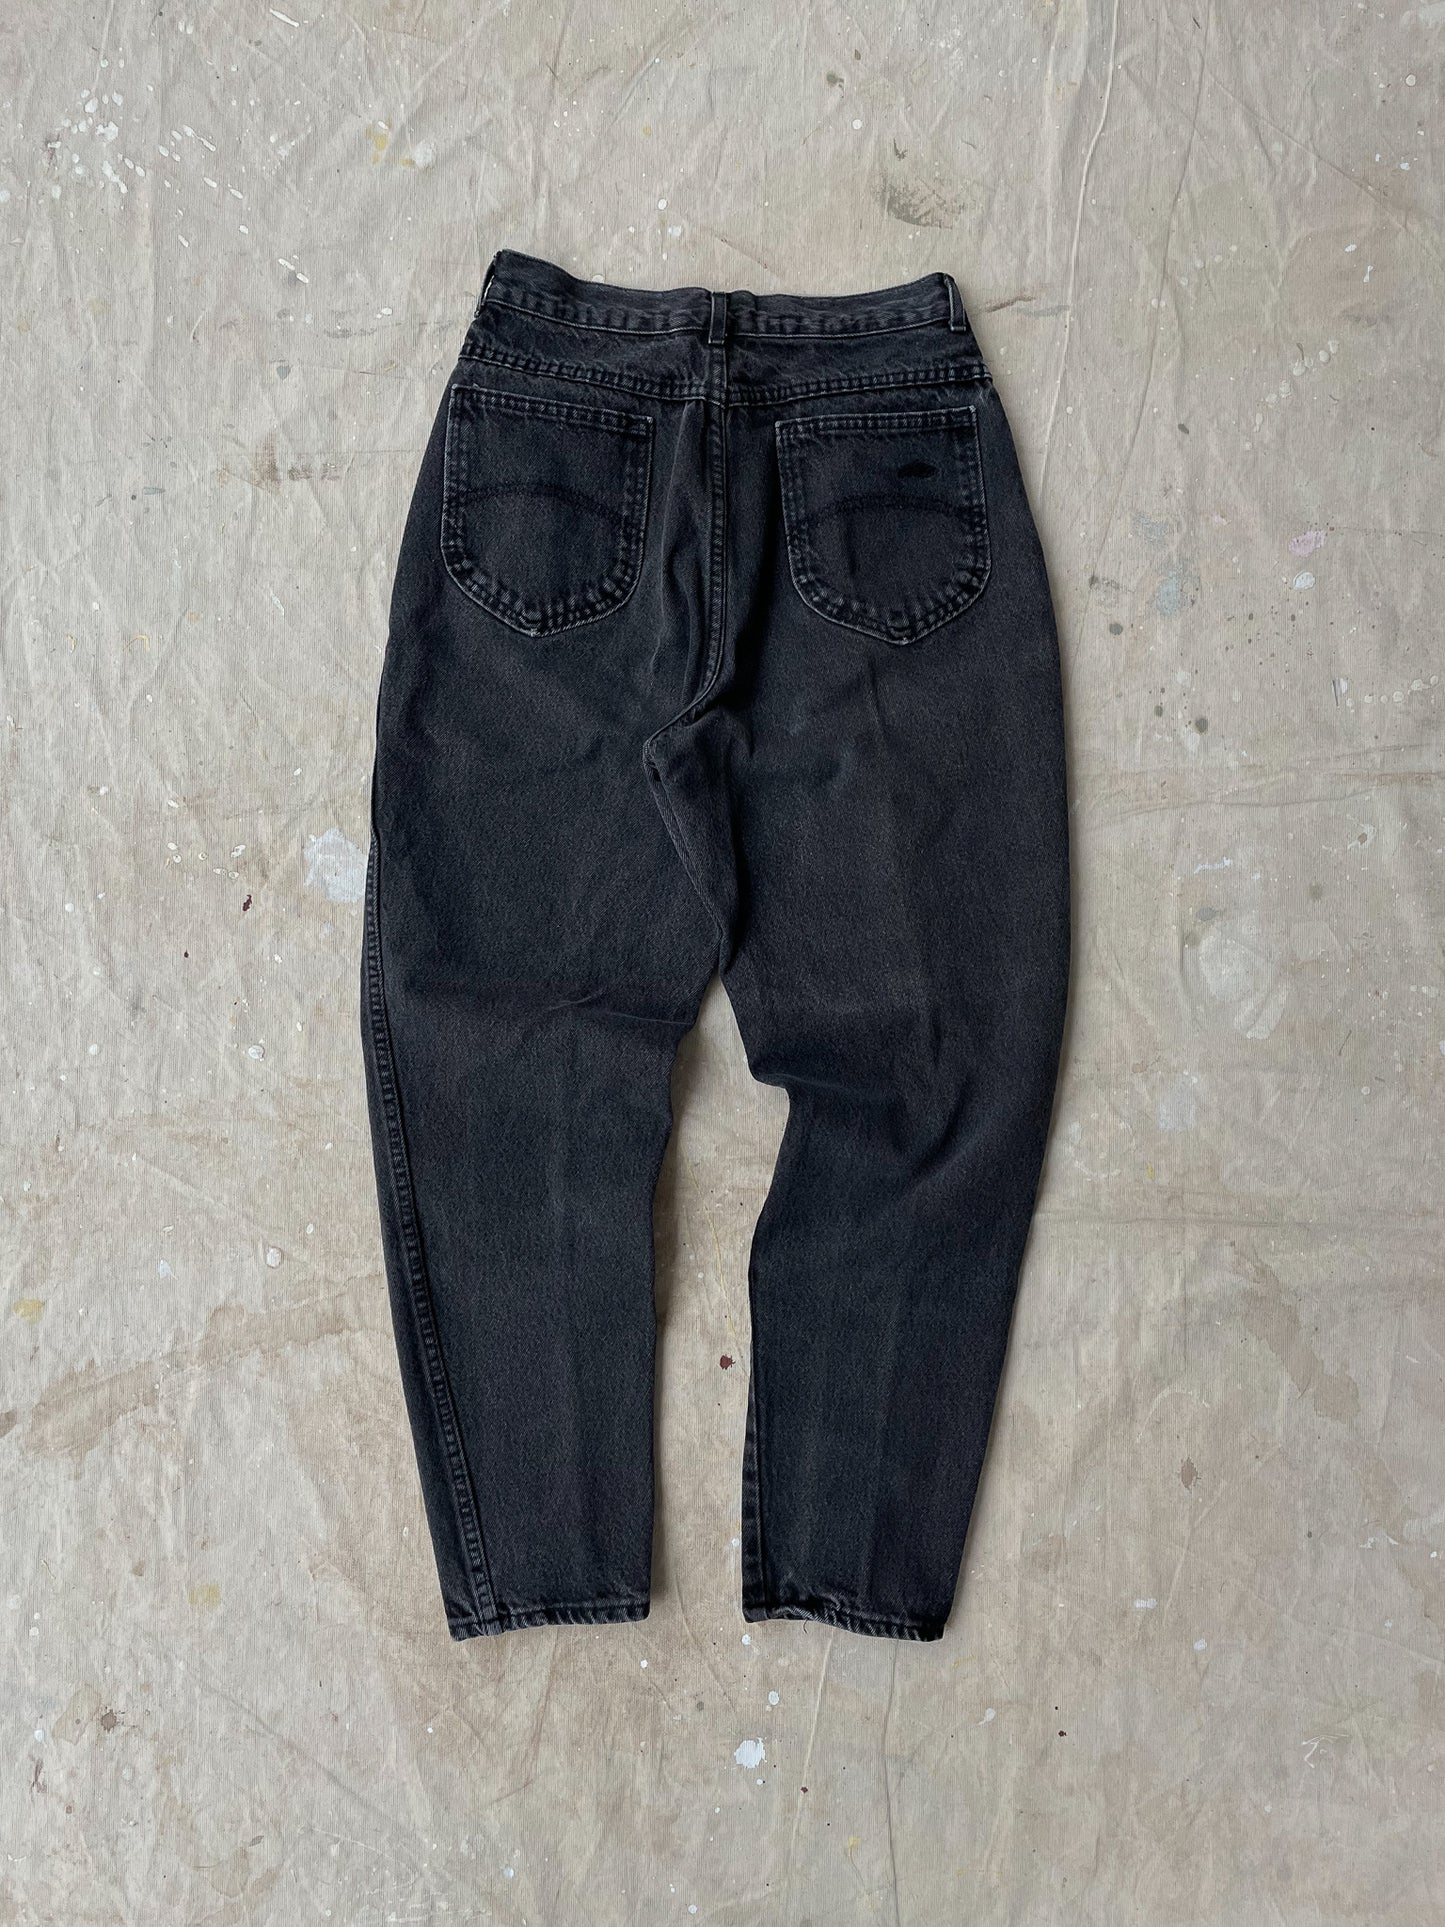 Chic Black Wash High-Rise Jeans—[27X28]